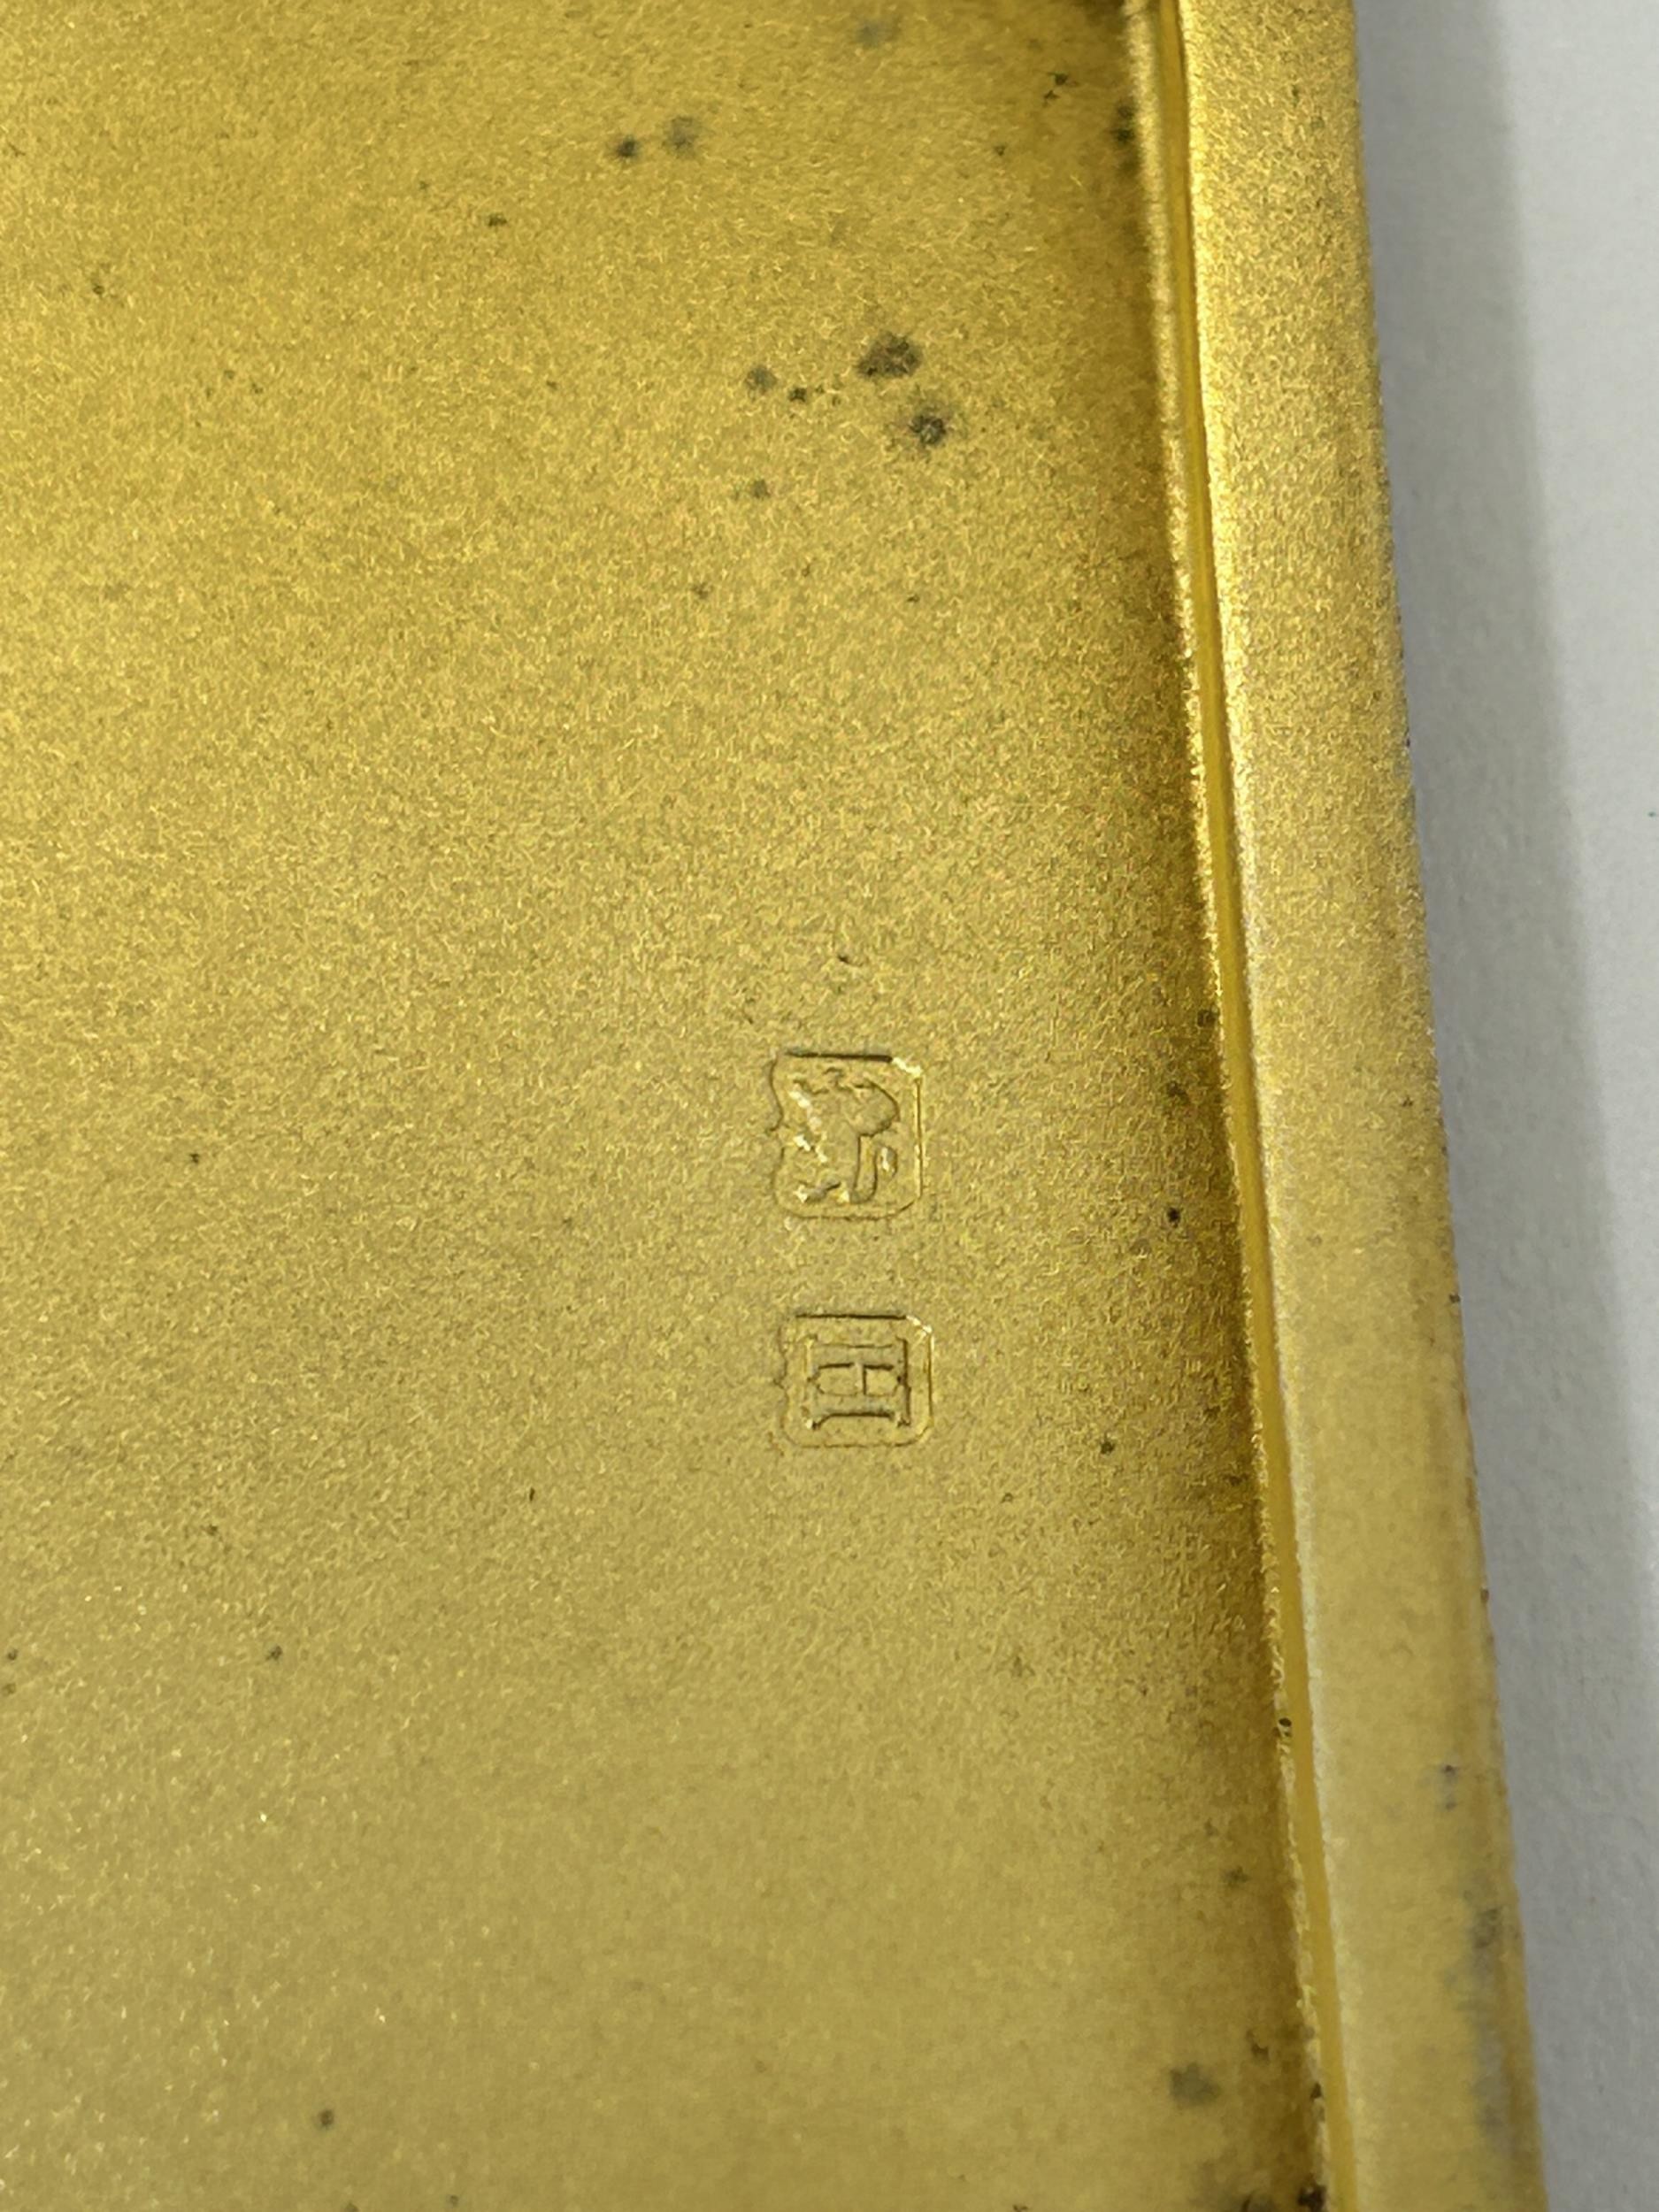 A George V silver and yellow enamel cigarette case, Birmingham 1932 - Image 6 of 6